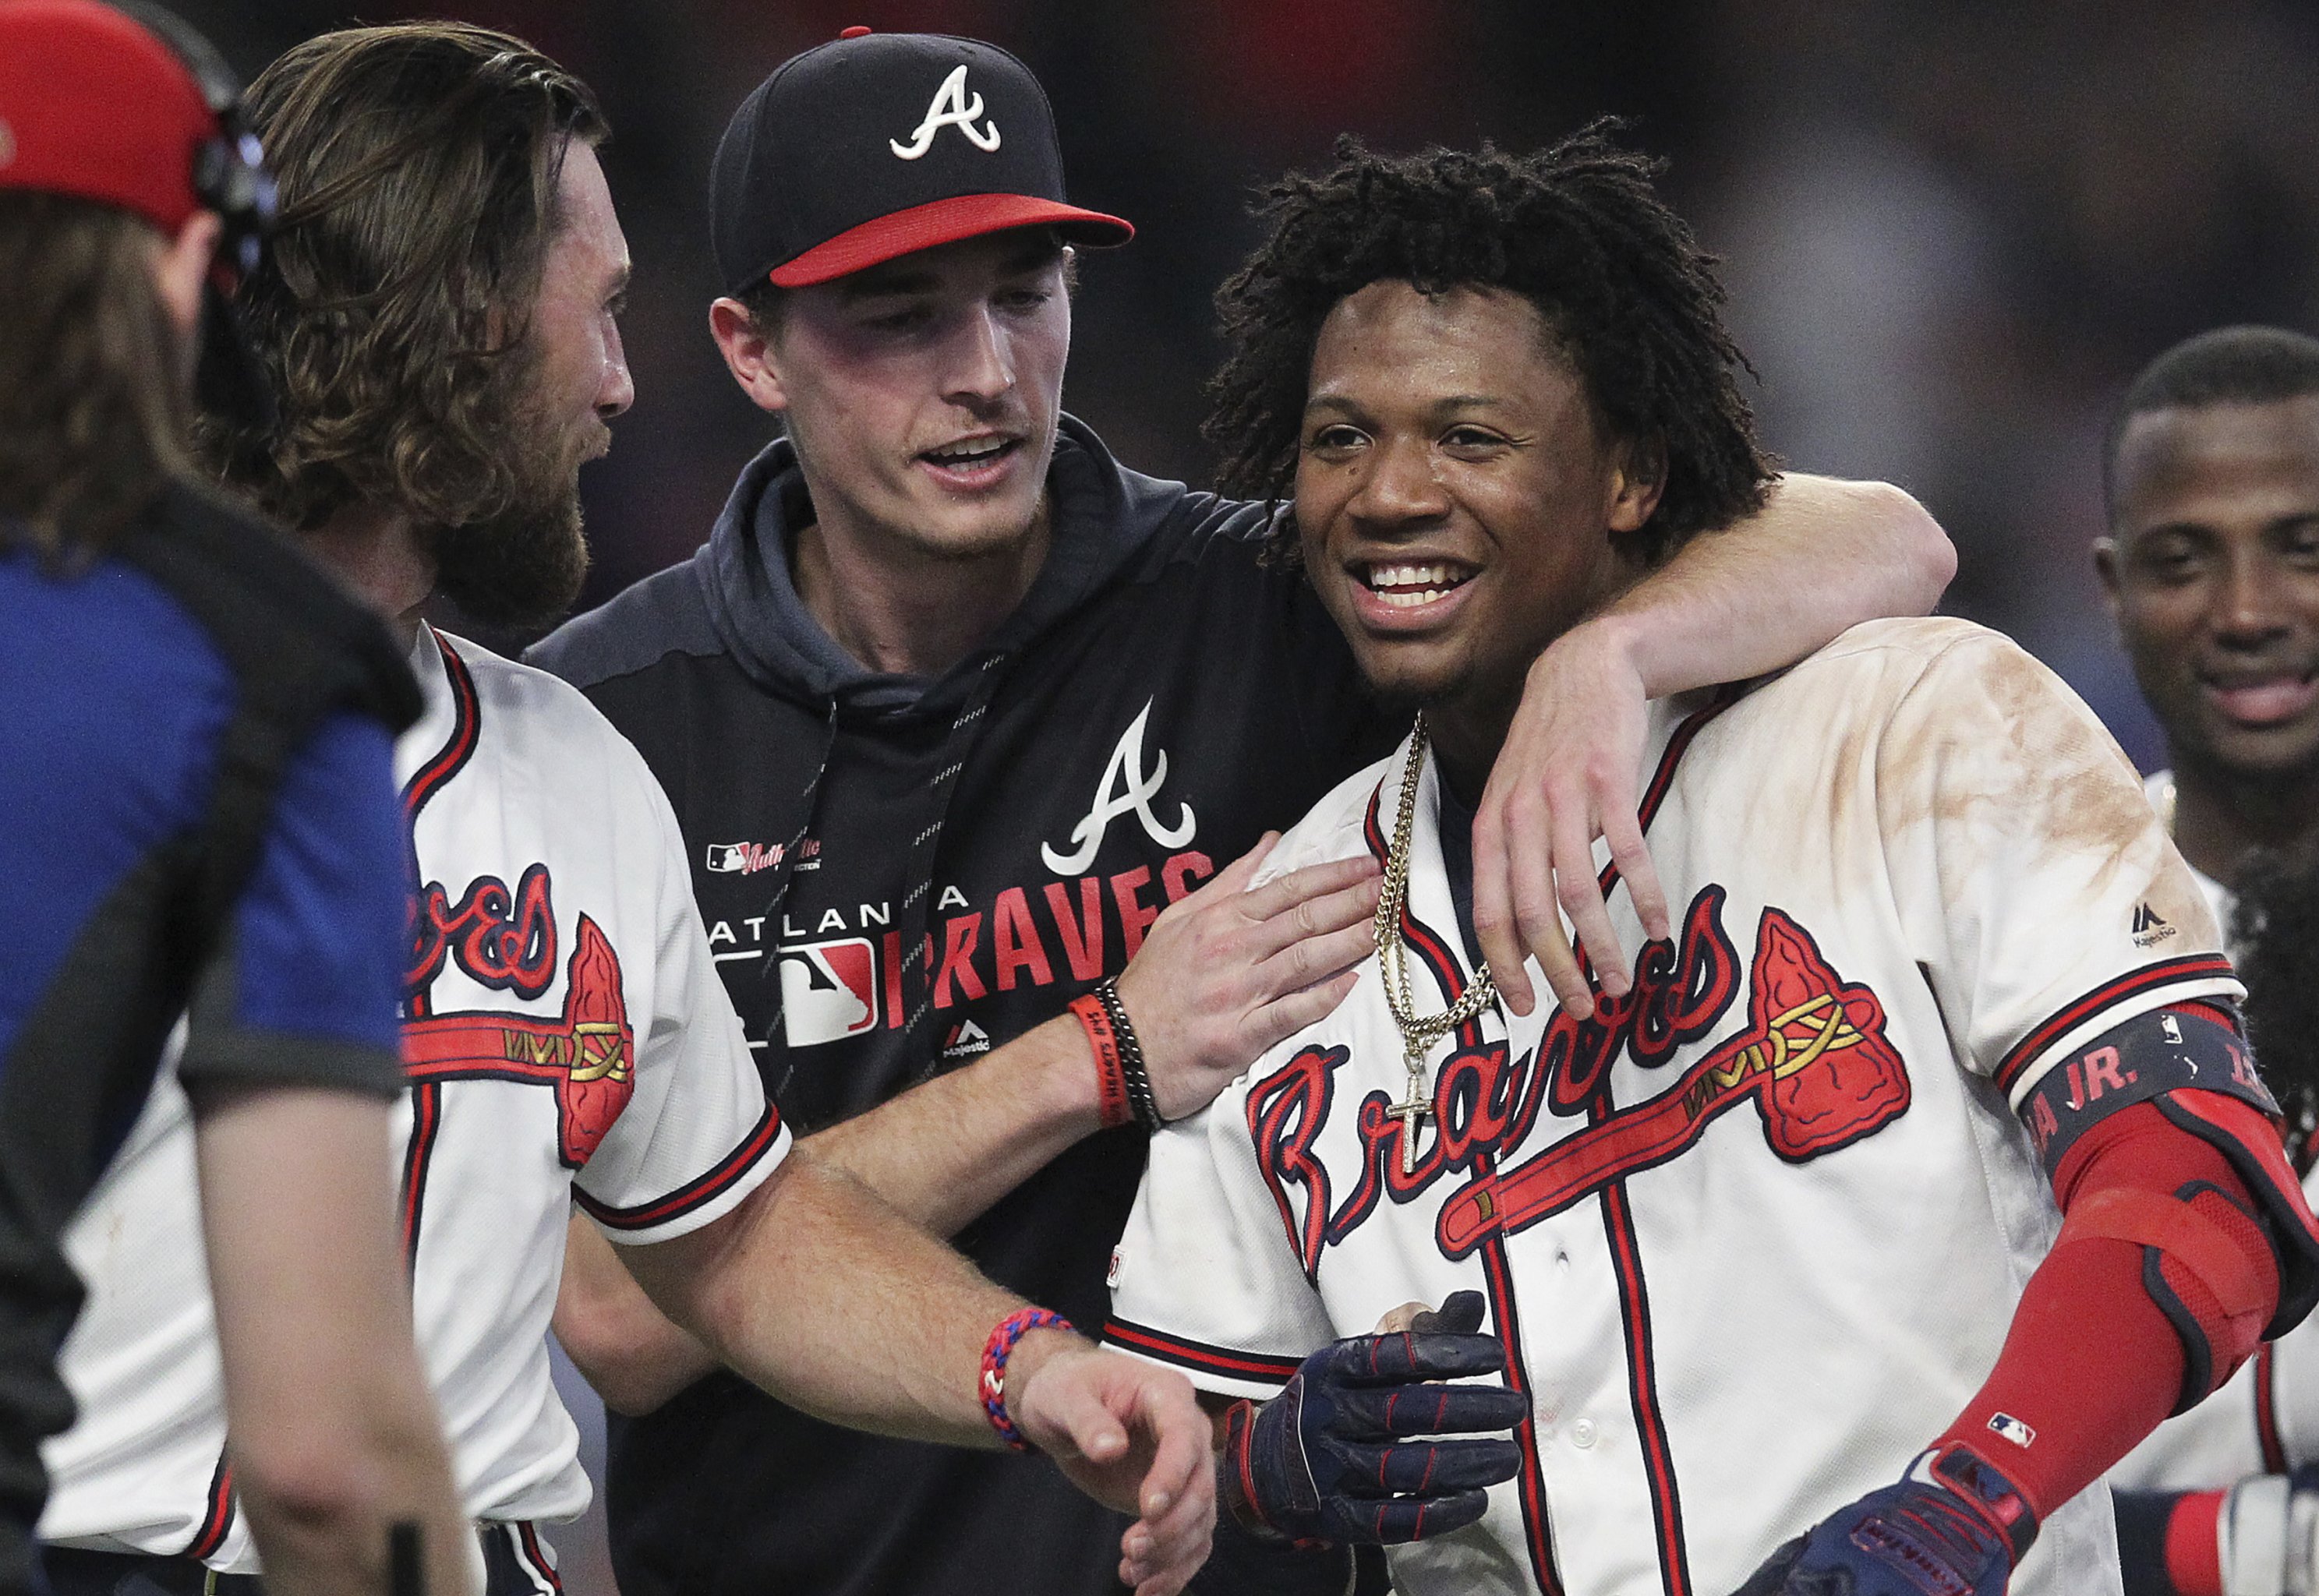 The Beast' Is Born: 21-Year-Old Ronald Acuna Jr. Is the New King of the ATL, News, Scores, Highlights, Stats, and Rumors